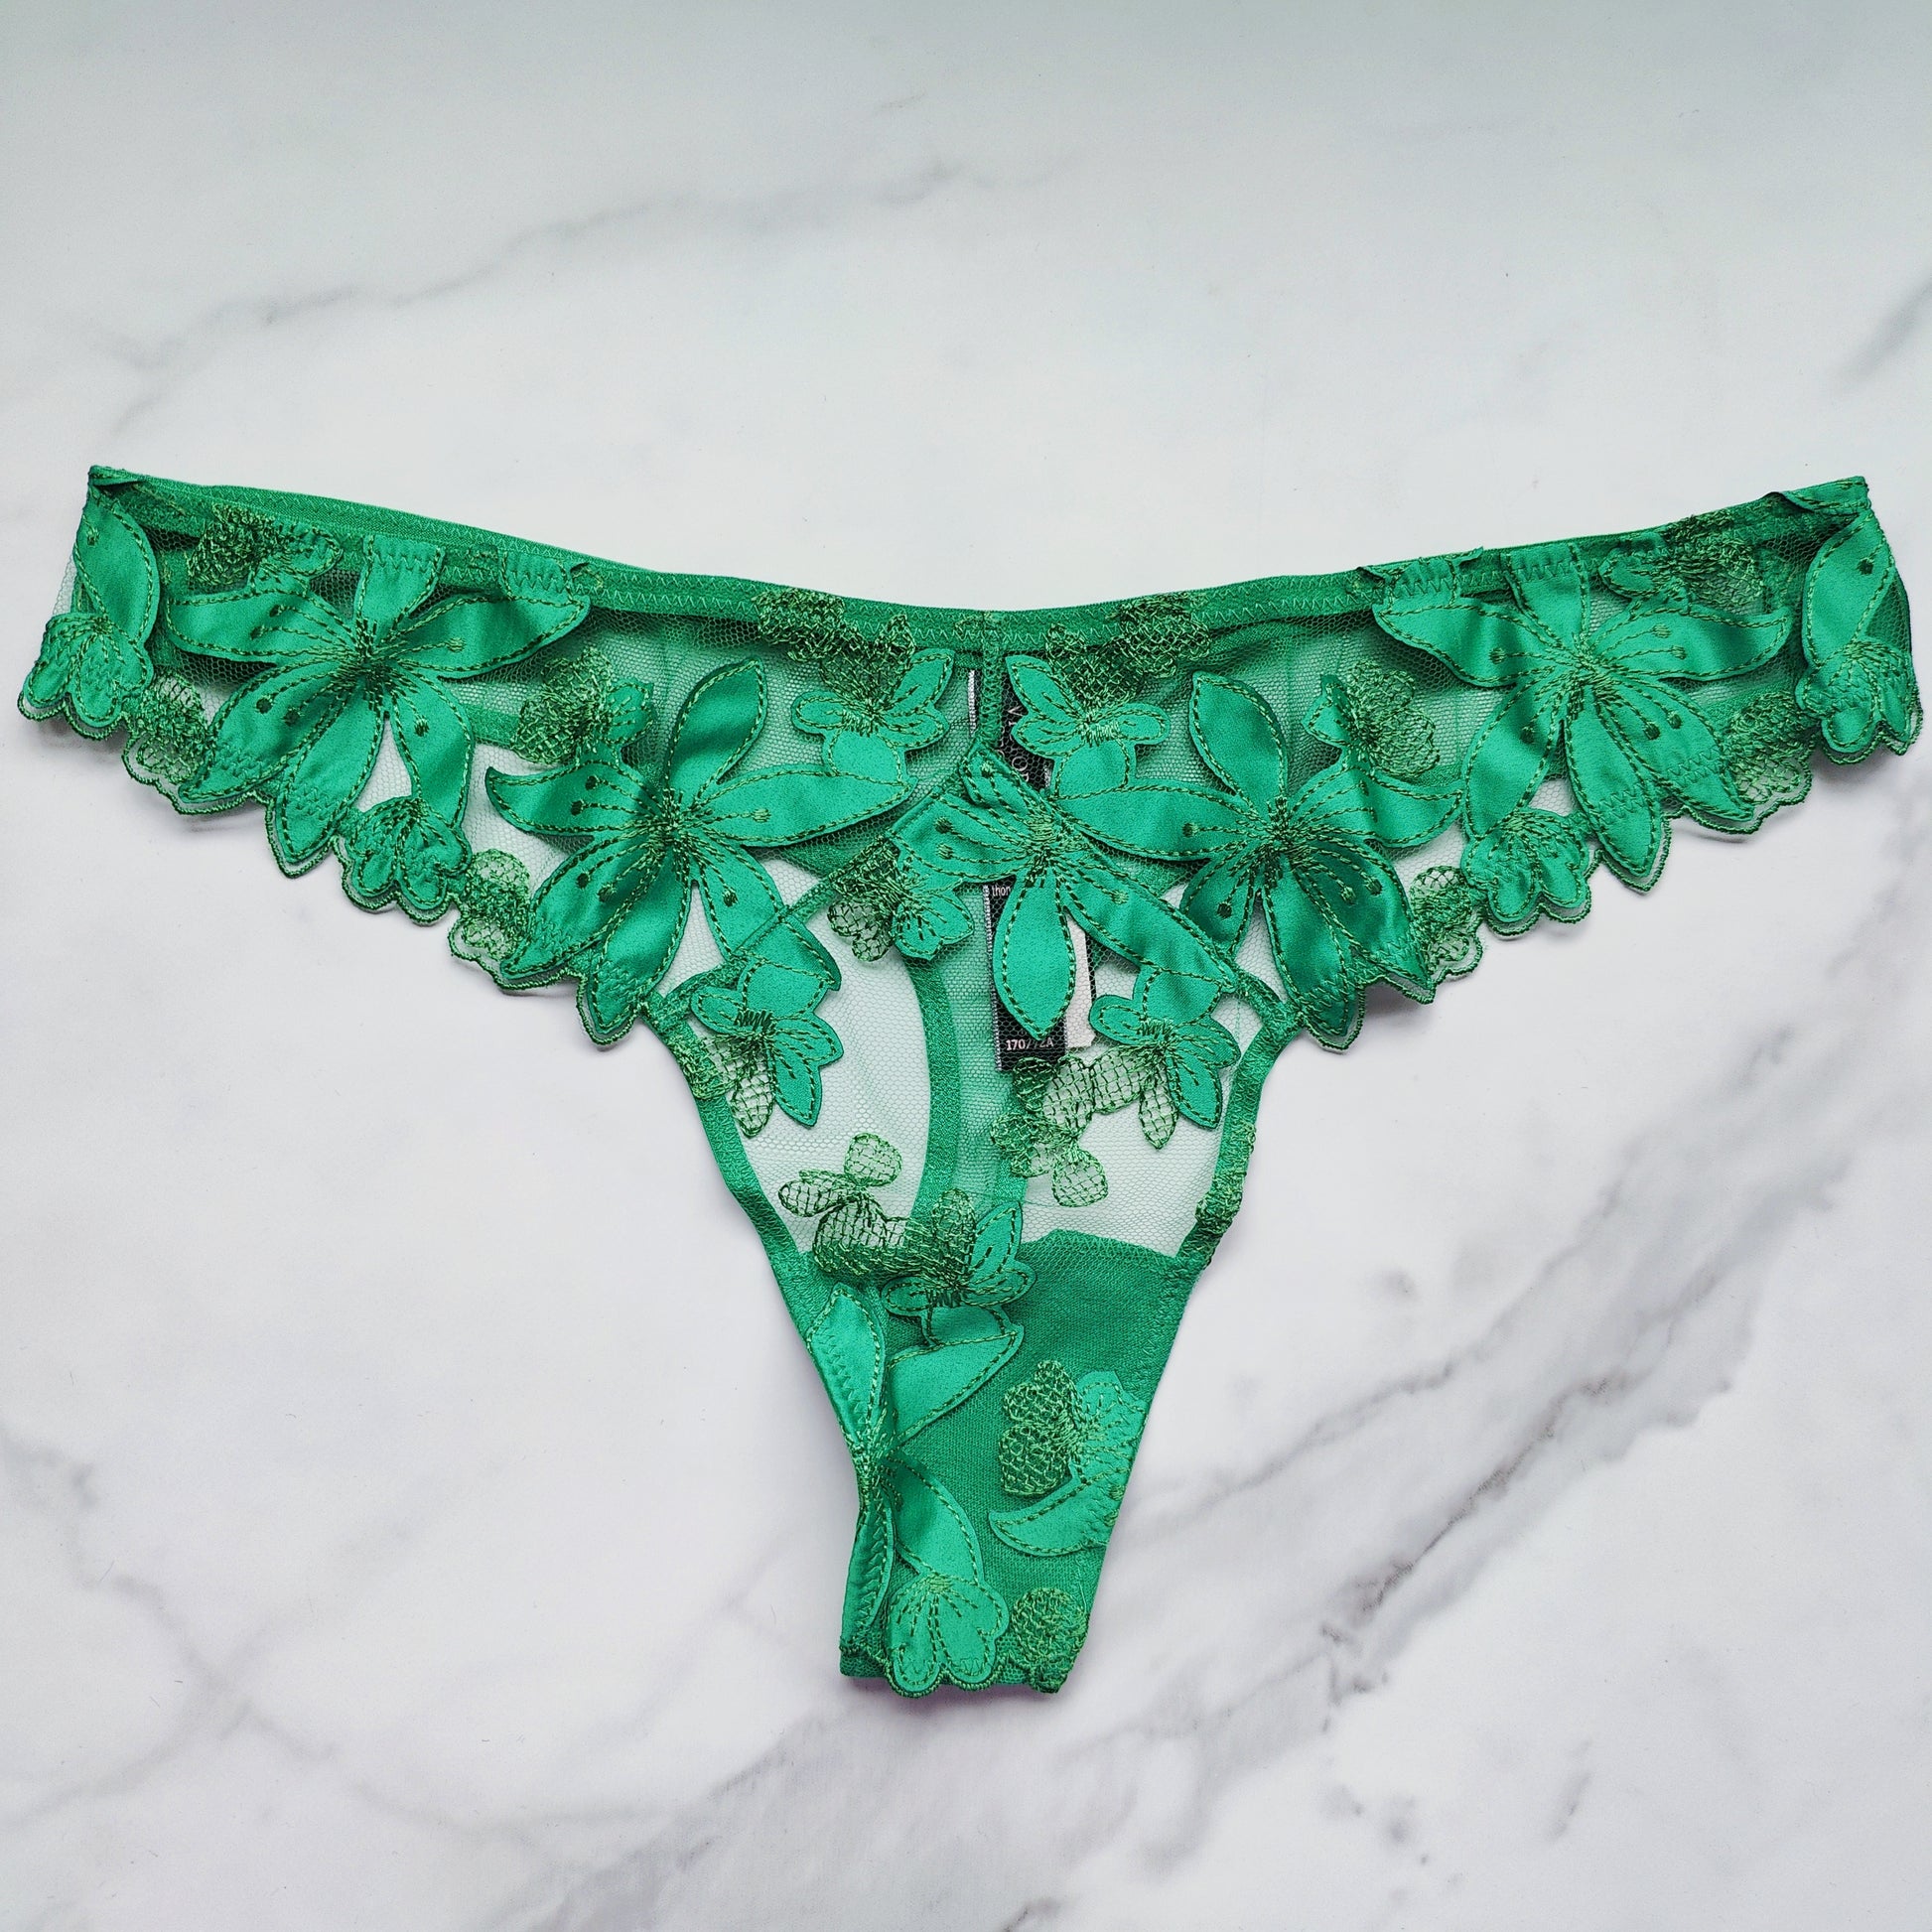 Sheer Green Thong with Shiny Green Stripes & Floral Lace Bands - Large